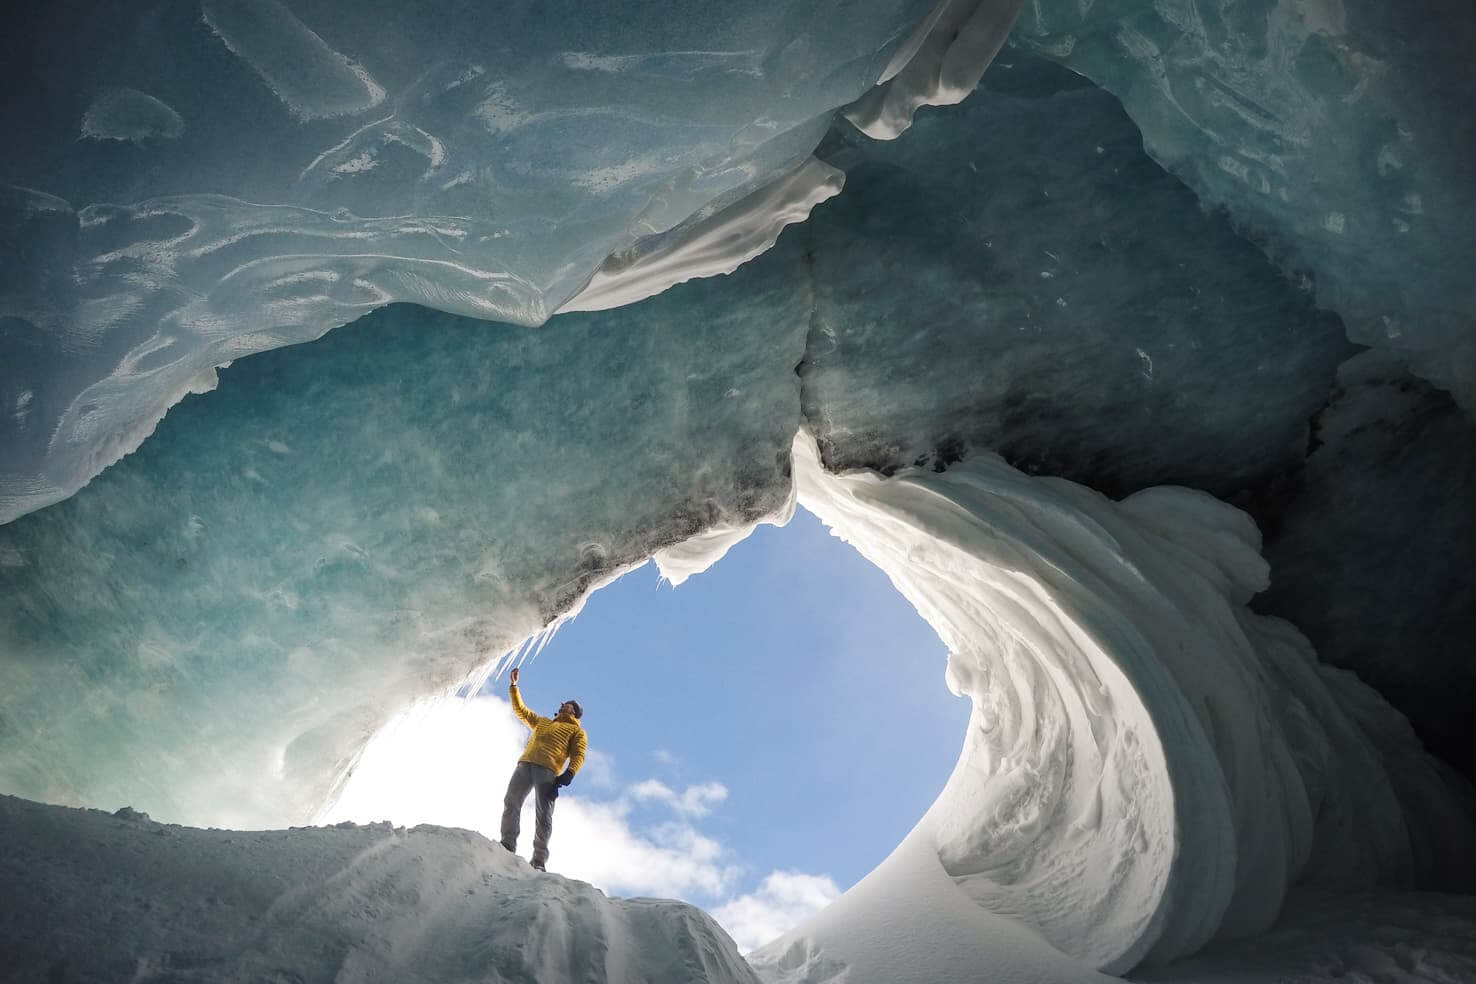 Things to do in Jasper National Park - 5 Explore ice caves along Icefields Parkway